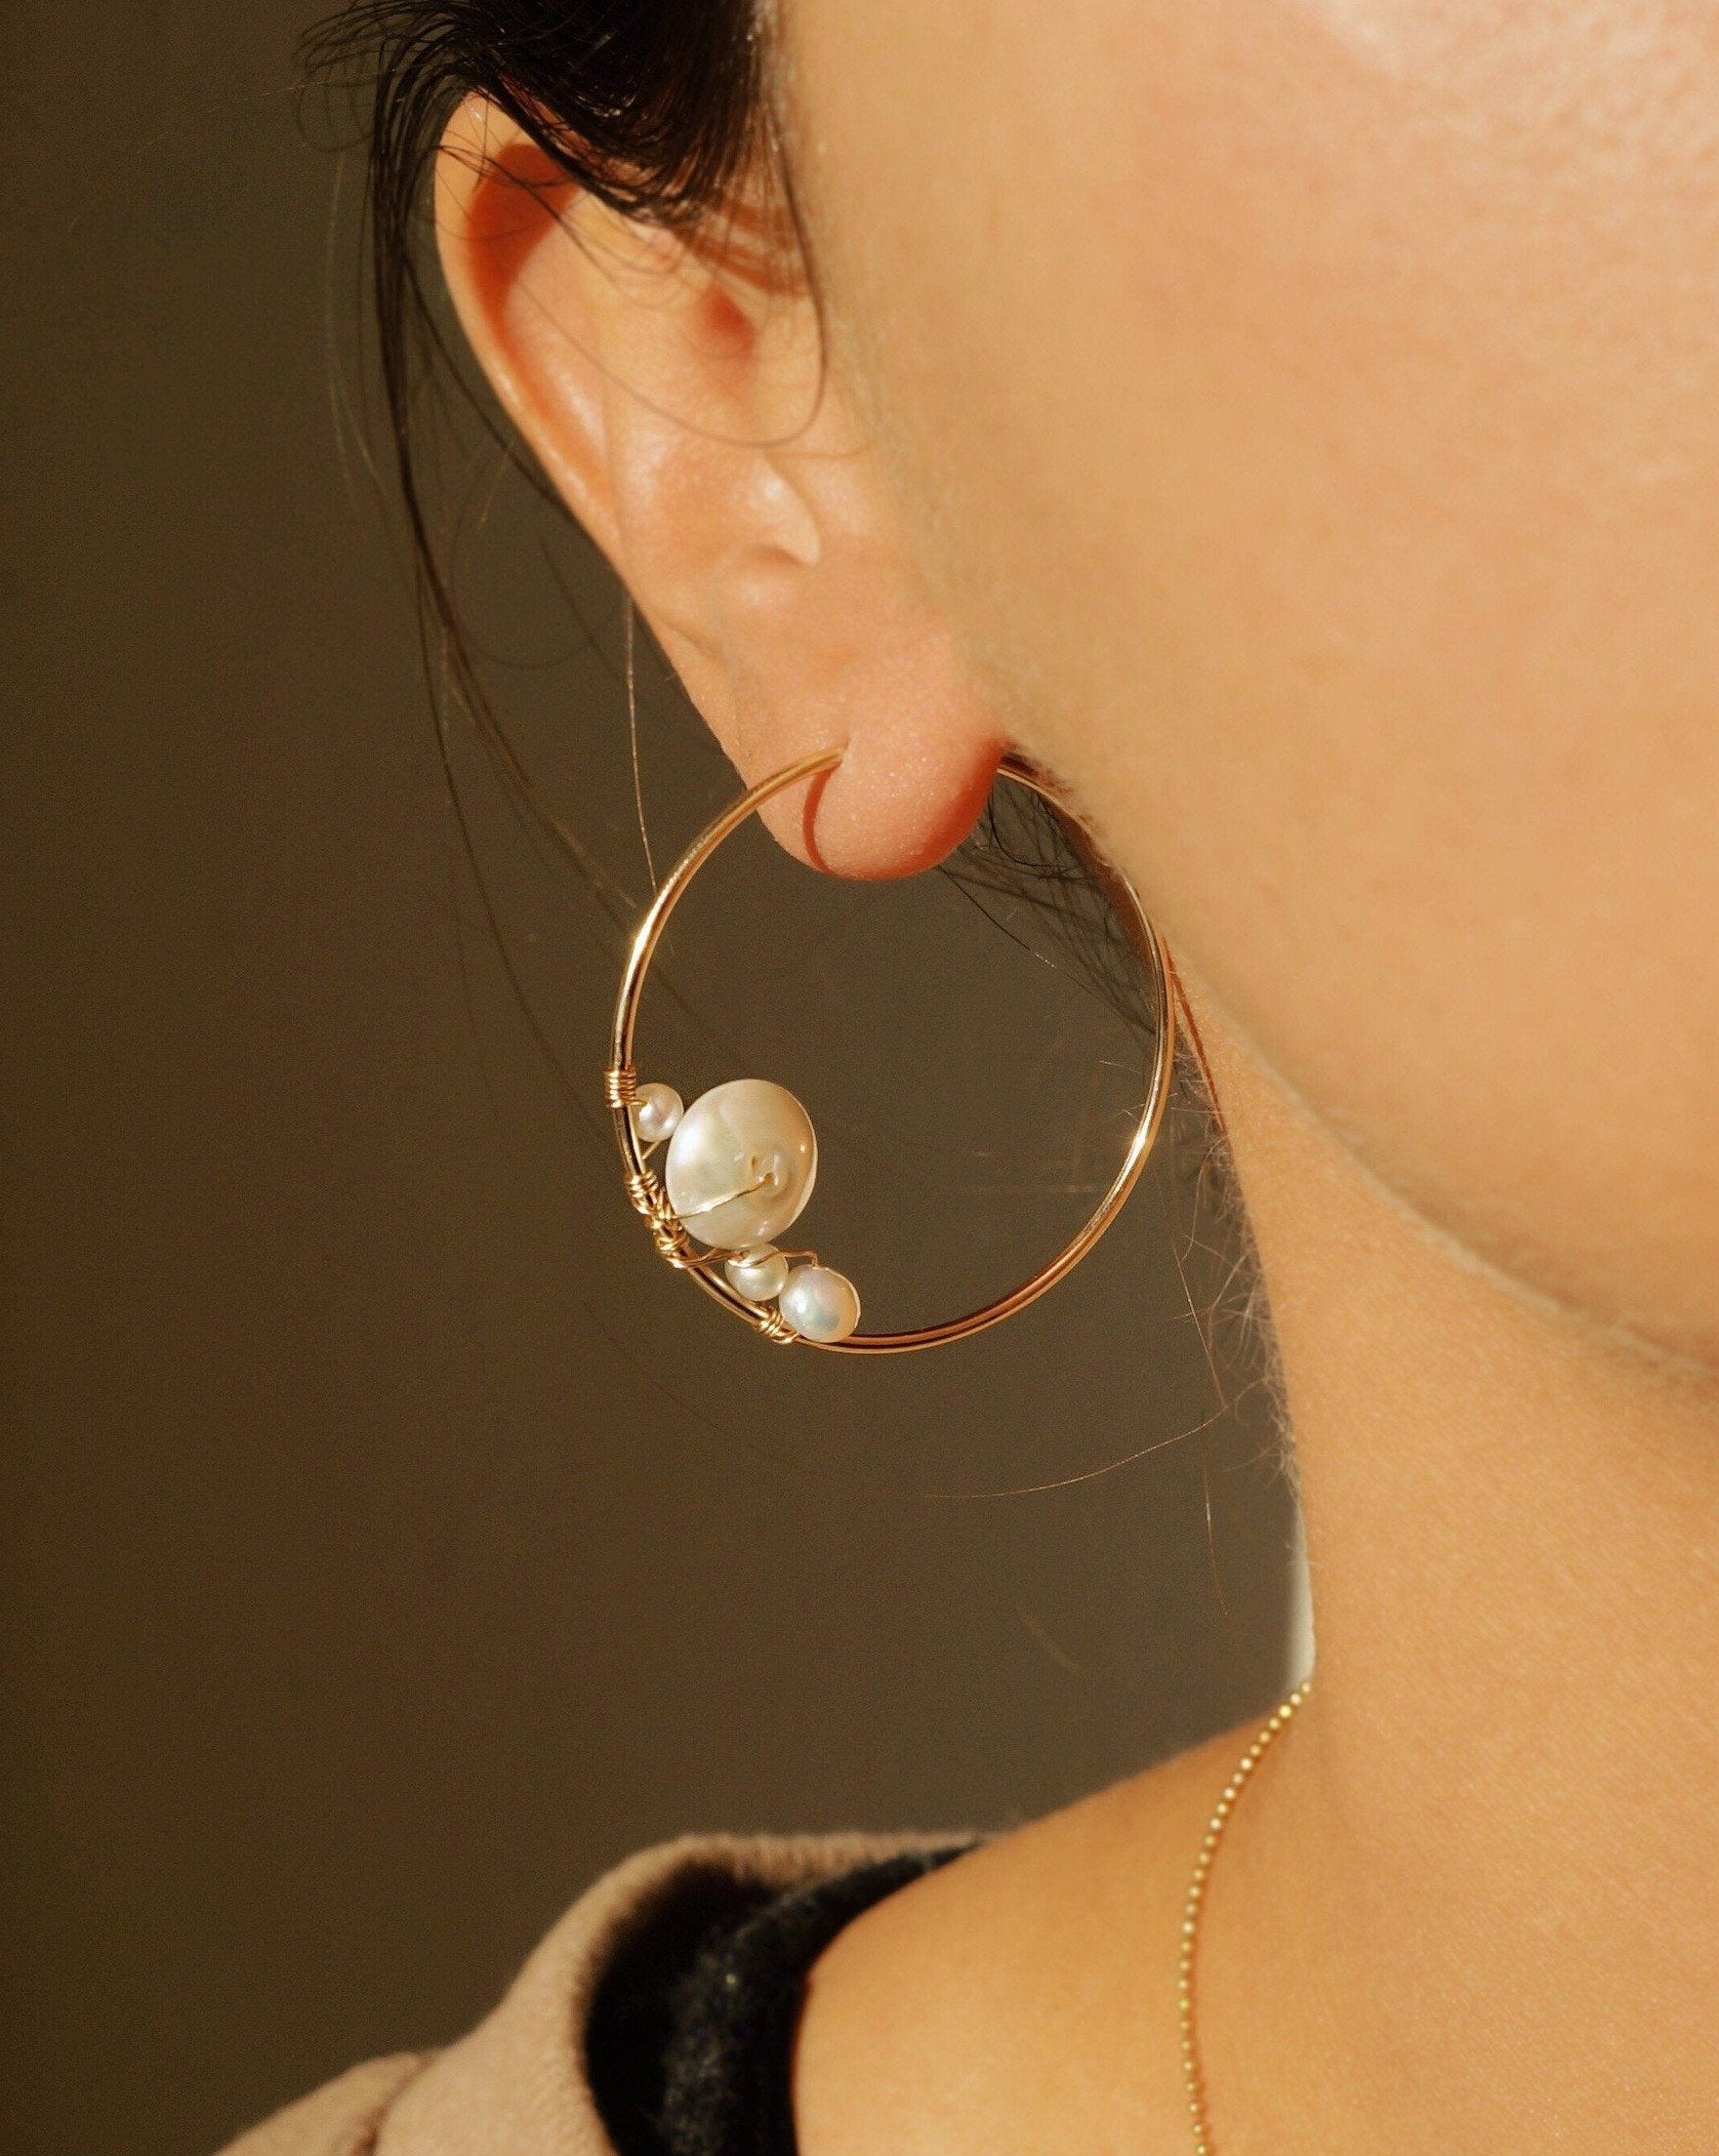 Tulum Hoop Earrings by KOZAKH. 38mm hoop earrings, crafted in 14K Gold Filled, featuring White Keshi pearl, 5mm White potato pearl, and 6mm Irregular shaped white pearl.